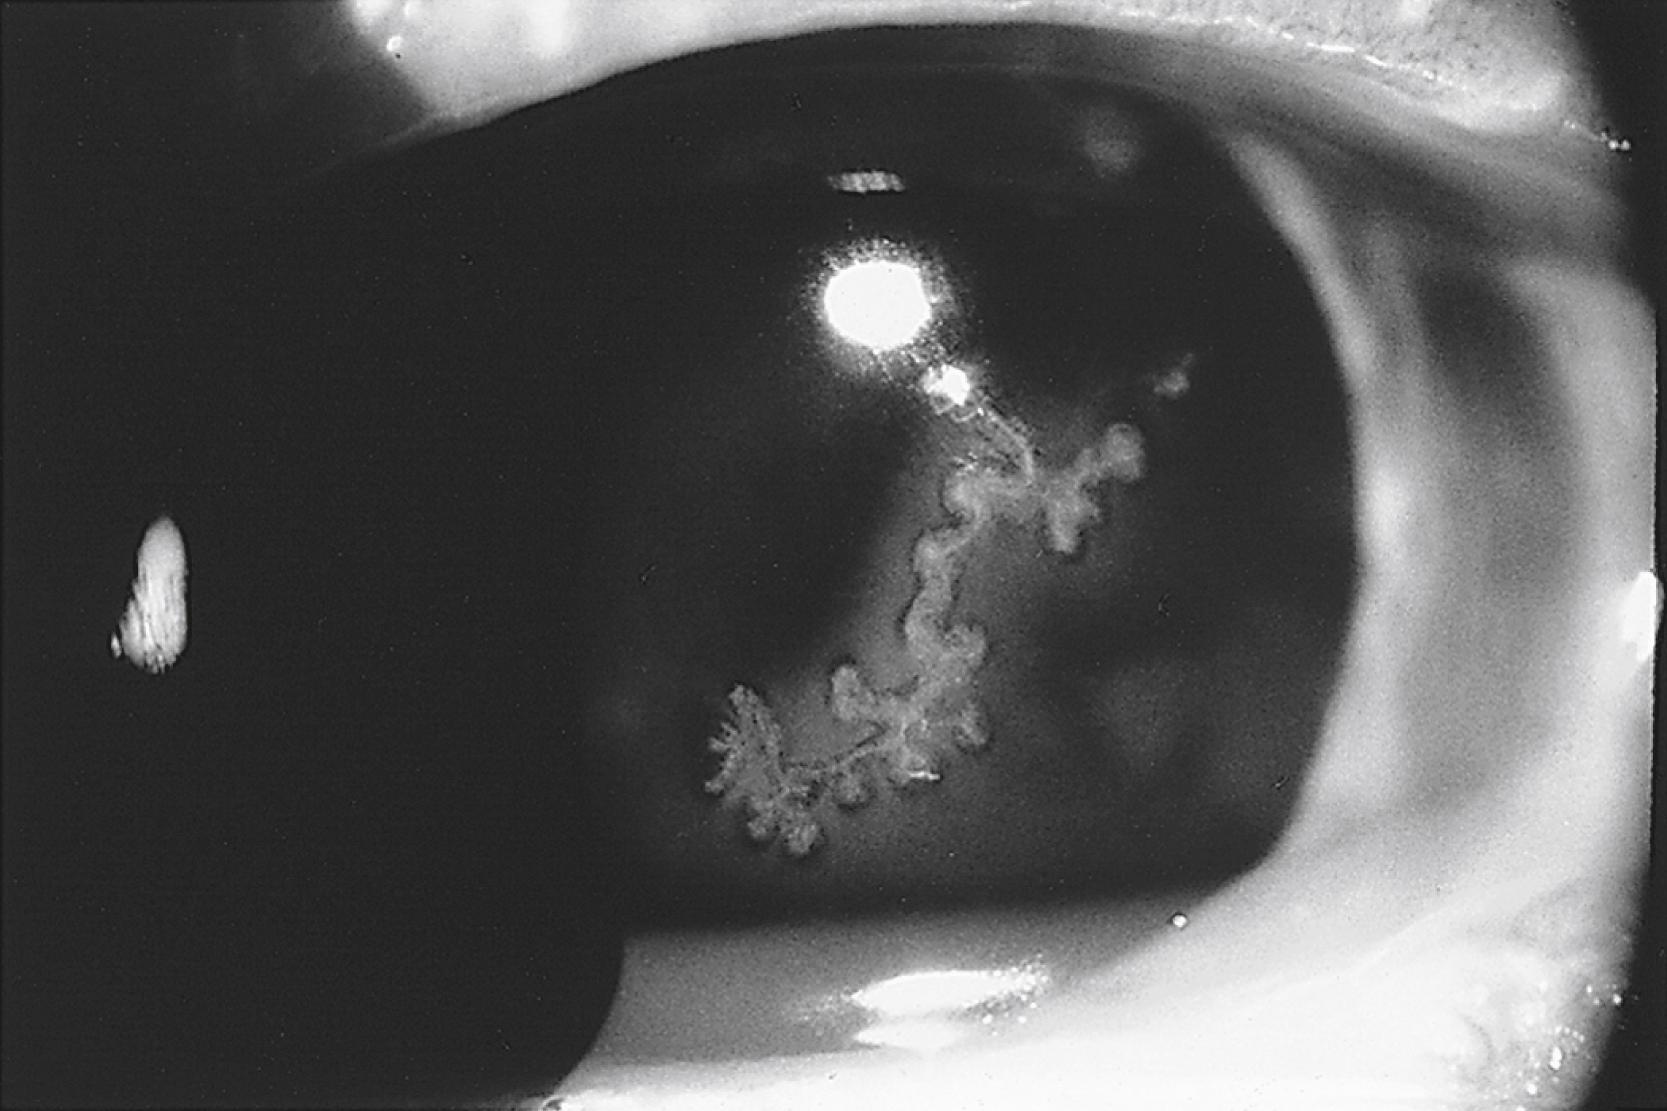 FIGURE 81.2, Slit-lamp appearance of recurrent dendritic keratitis due to herpes simplex virus stained with 1% fluorescein.